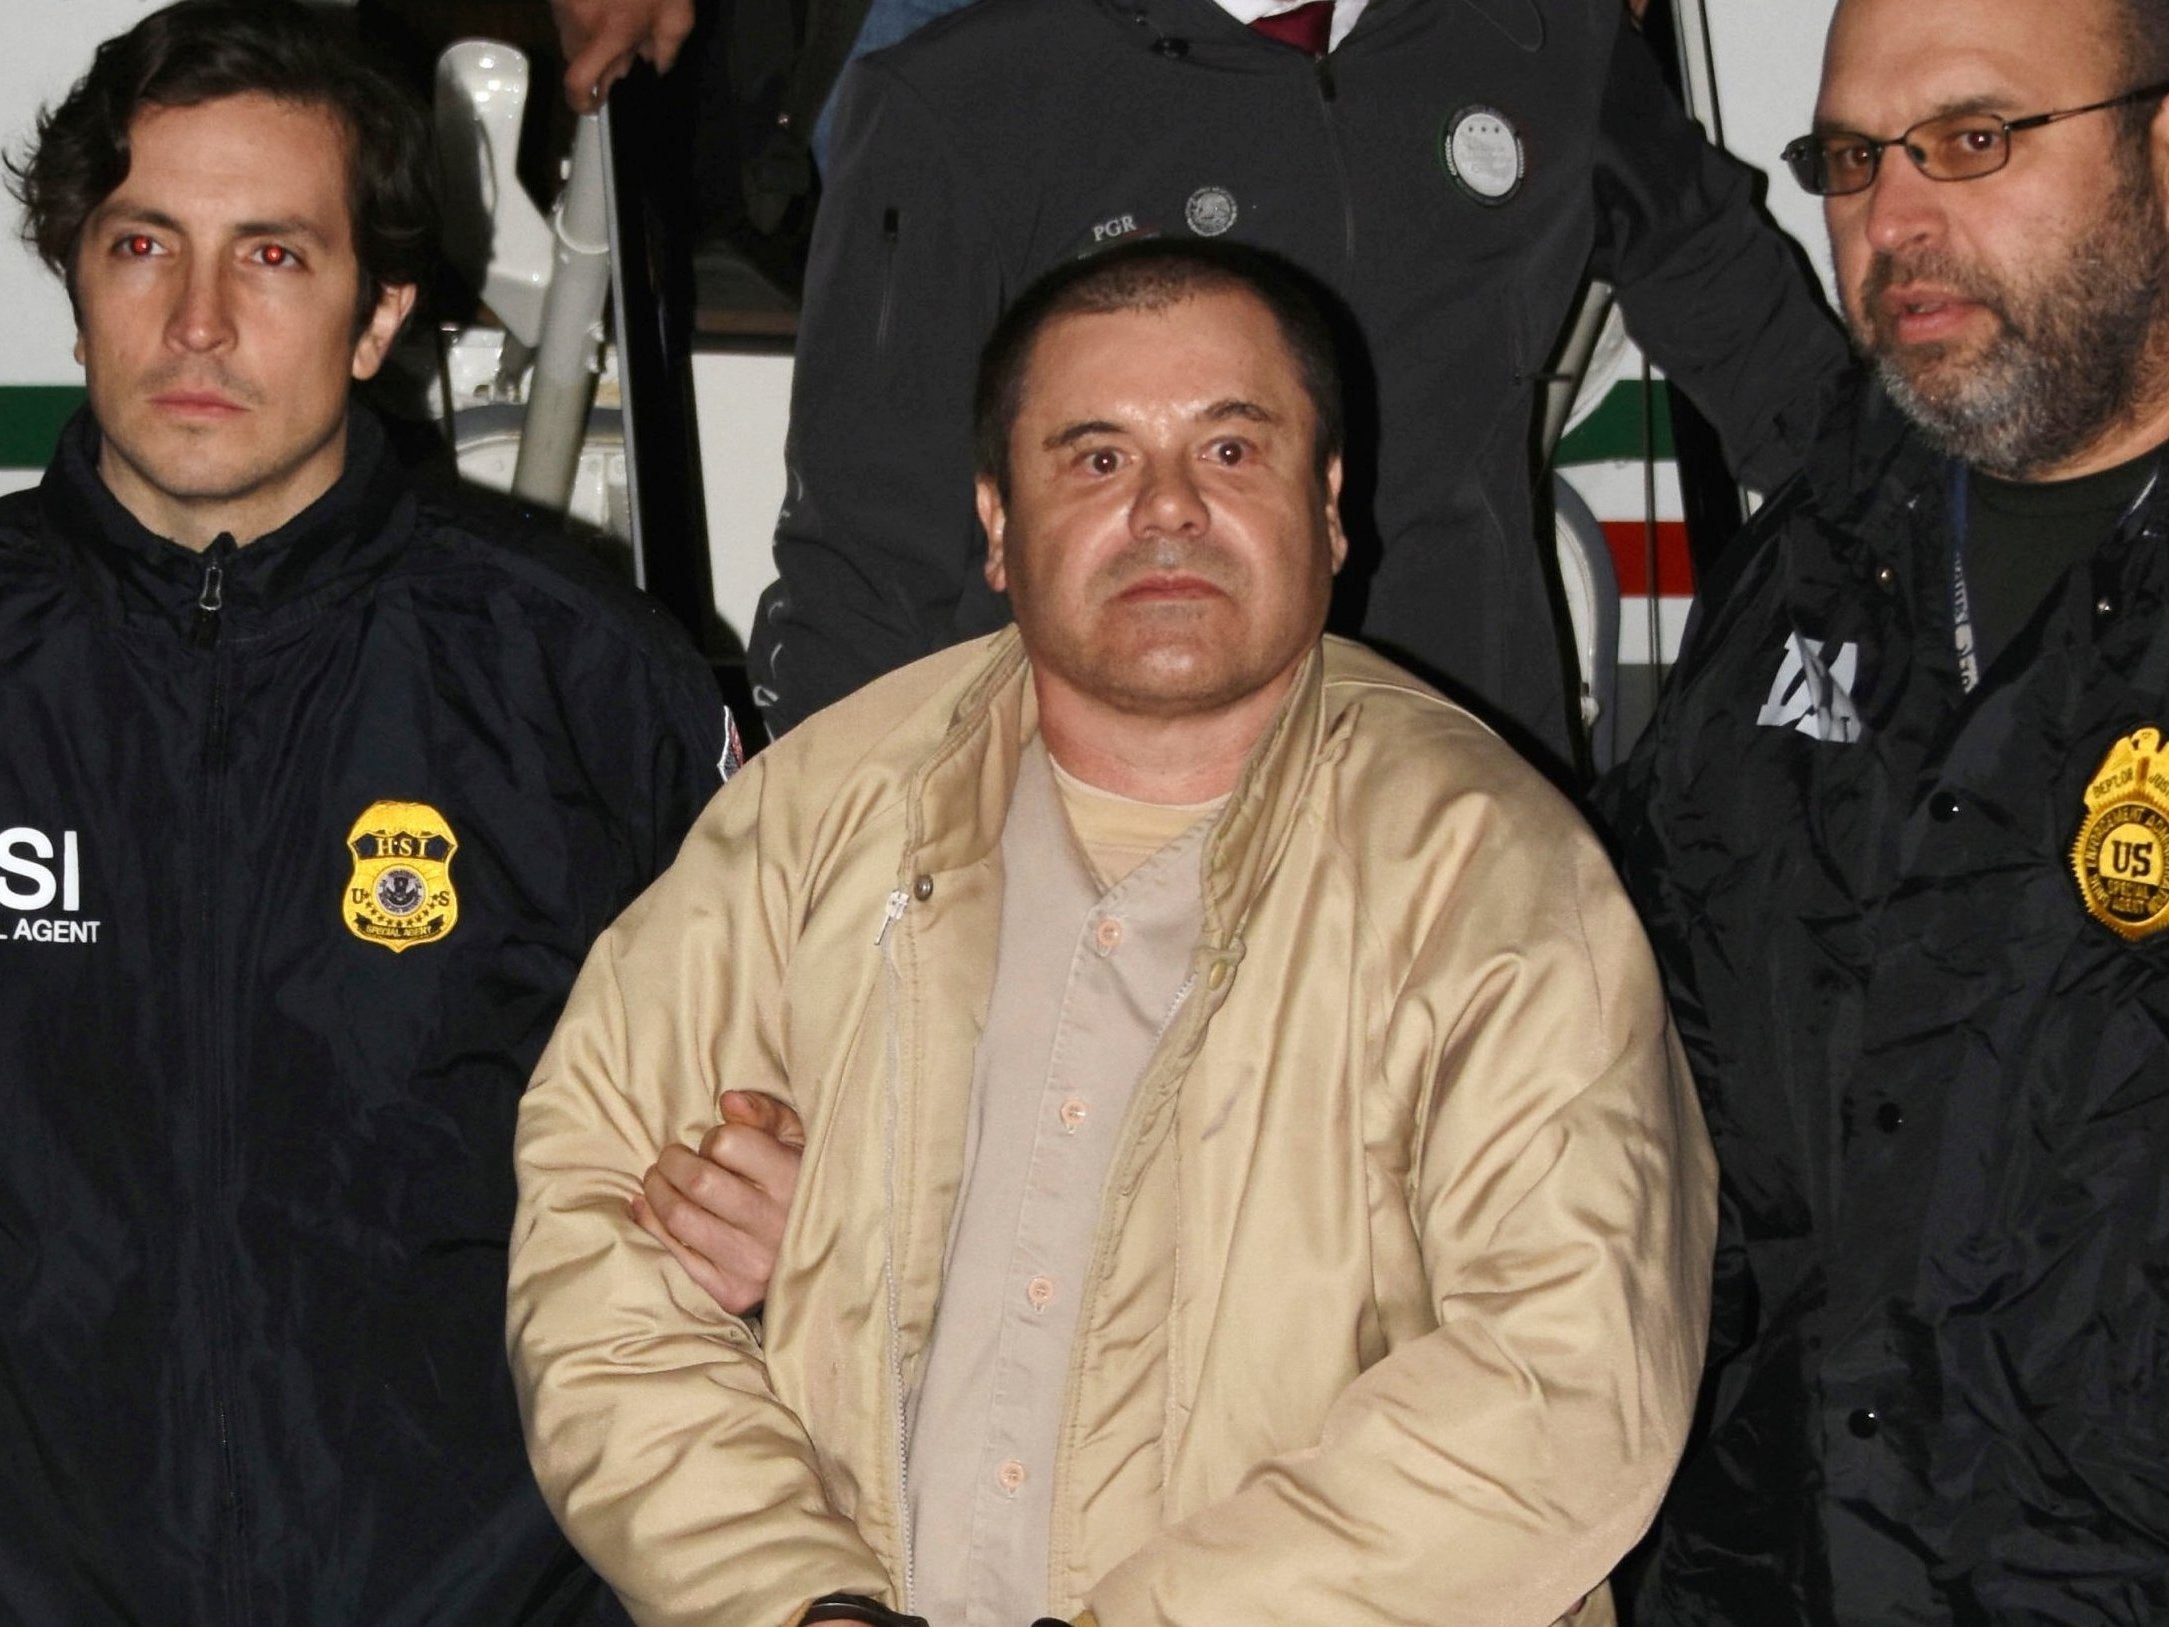 El Chapo news: Convicted drug lord Joaquin Guzman seeks new trial because of his bad public image